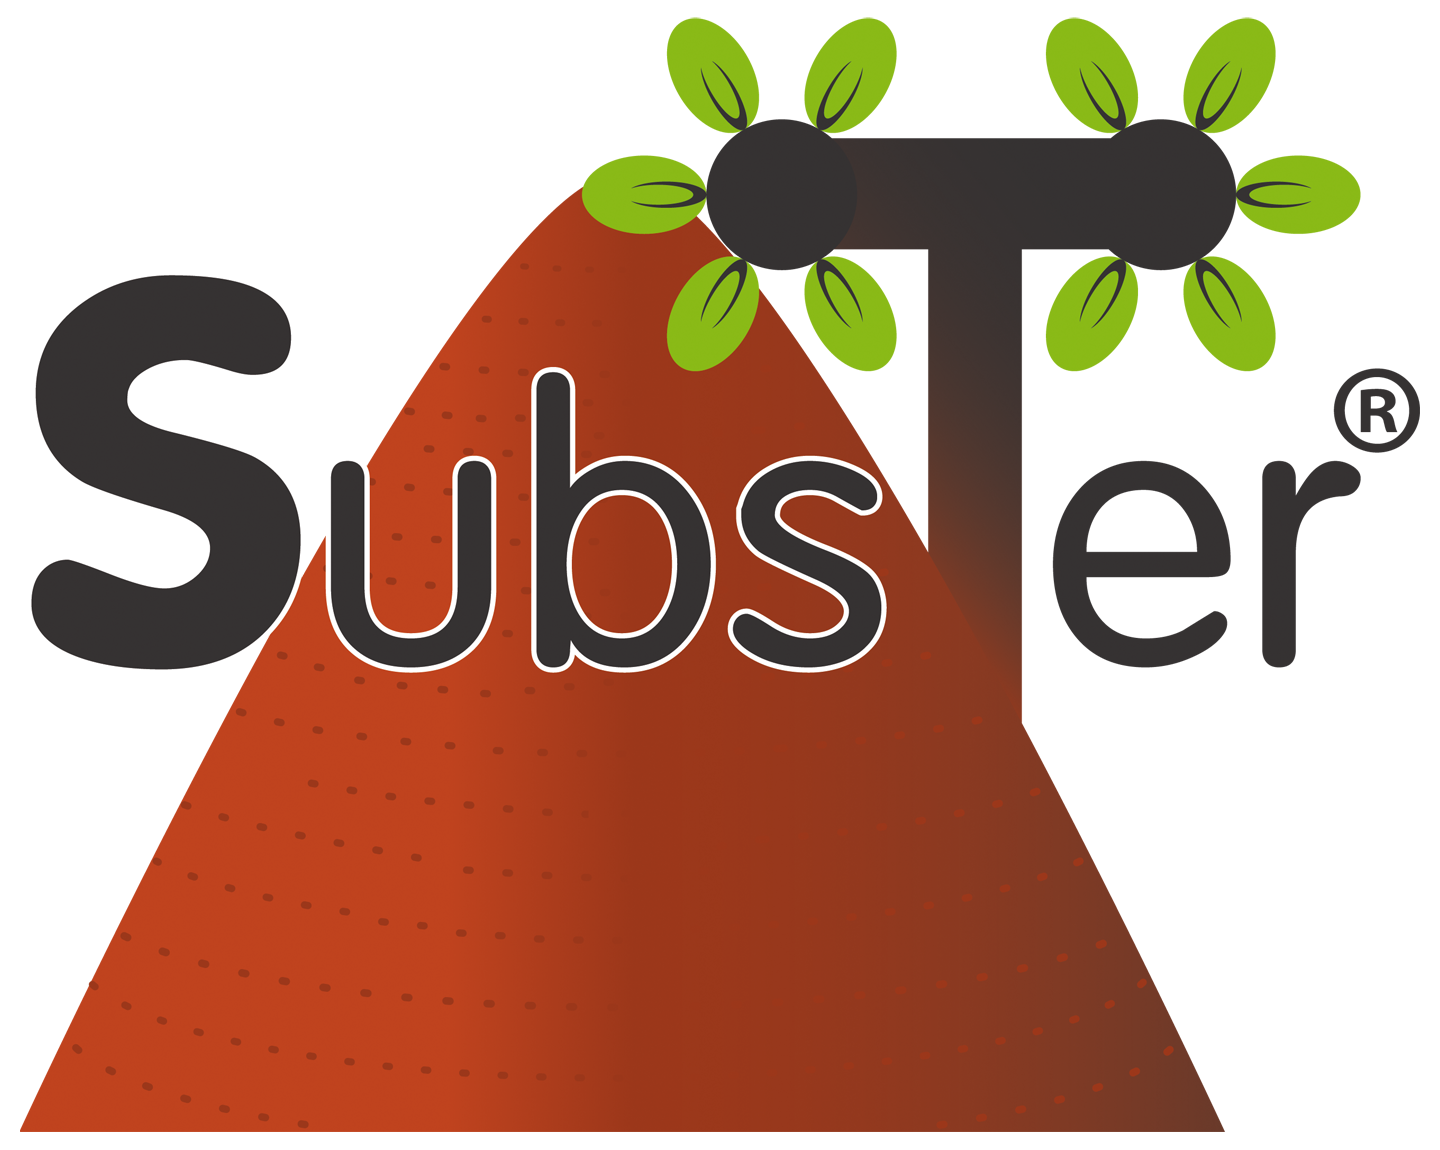 SUBSTER